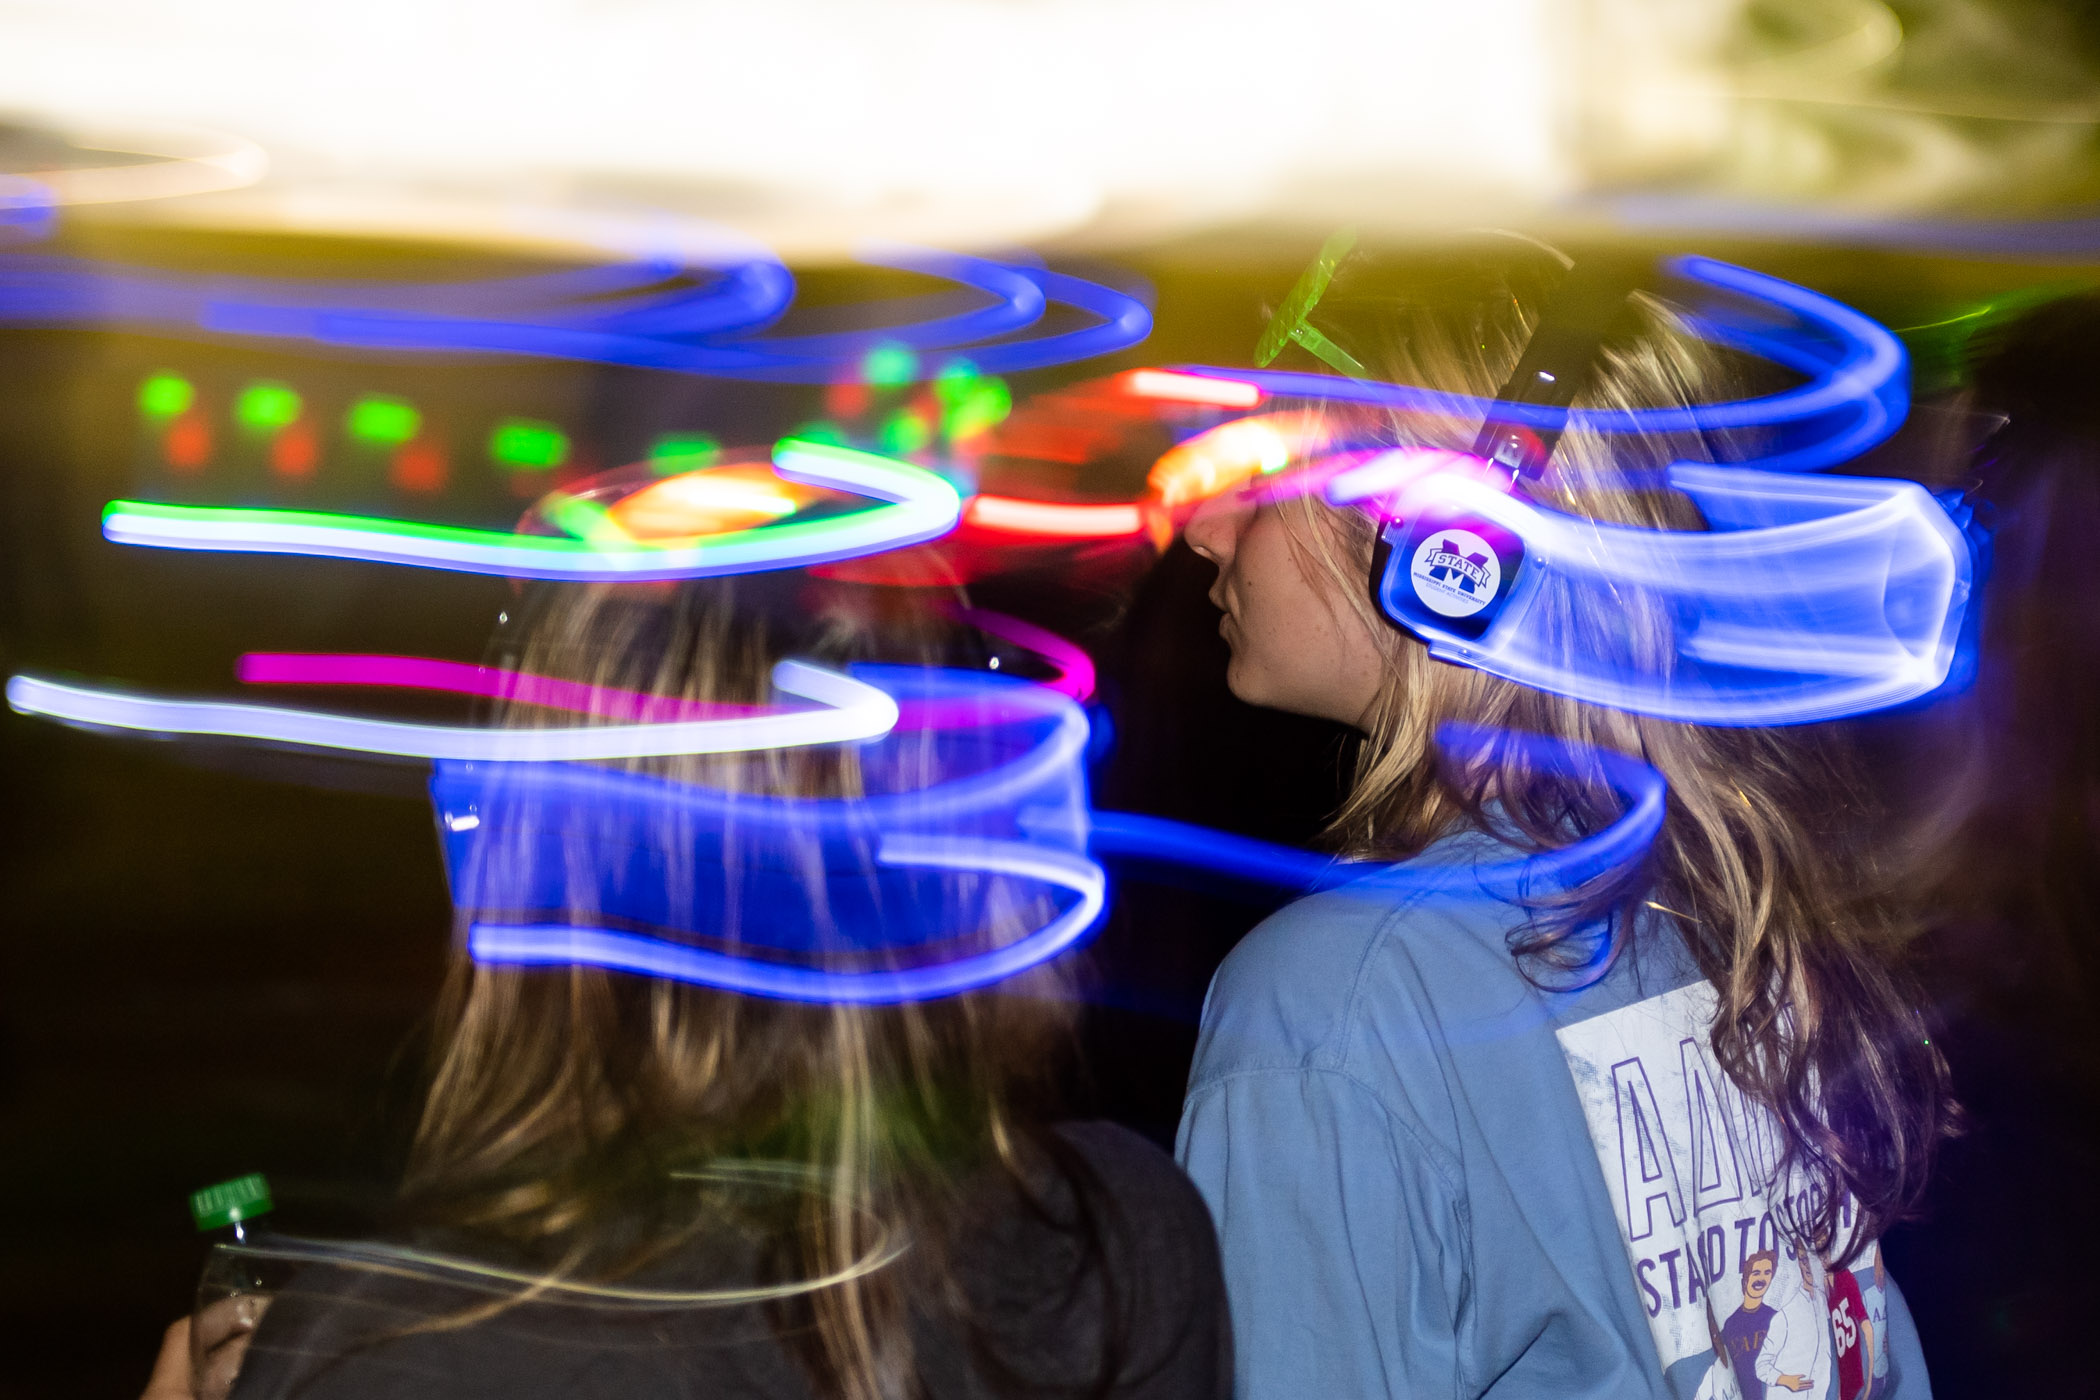 Students enjoy a fun but &quot;silent&quot; night from MSU Student Associations &quot;glow headphone rave.&quot;